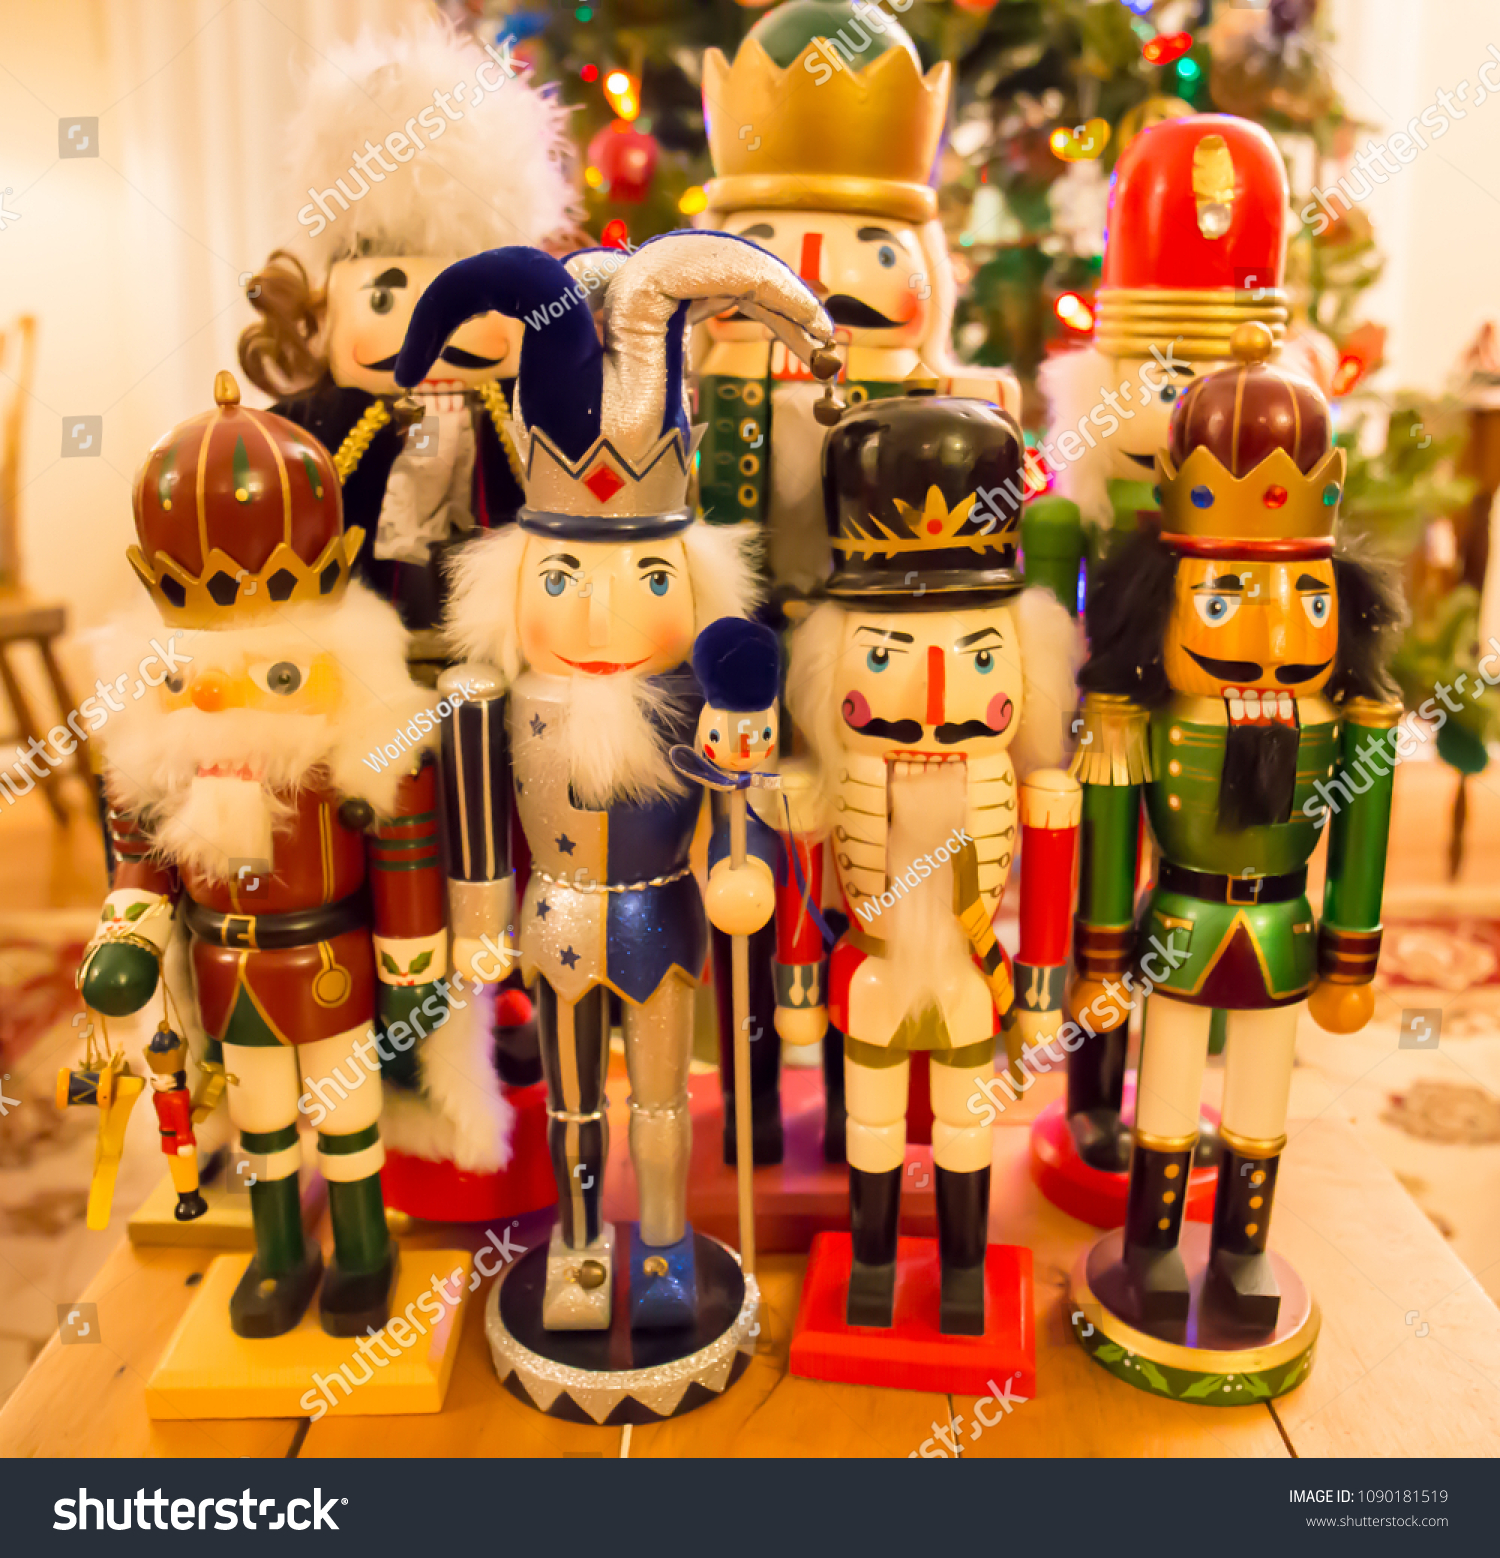 old wooden nutcrackers